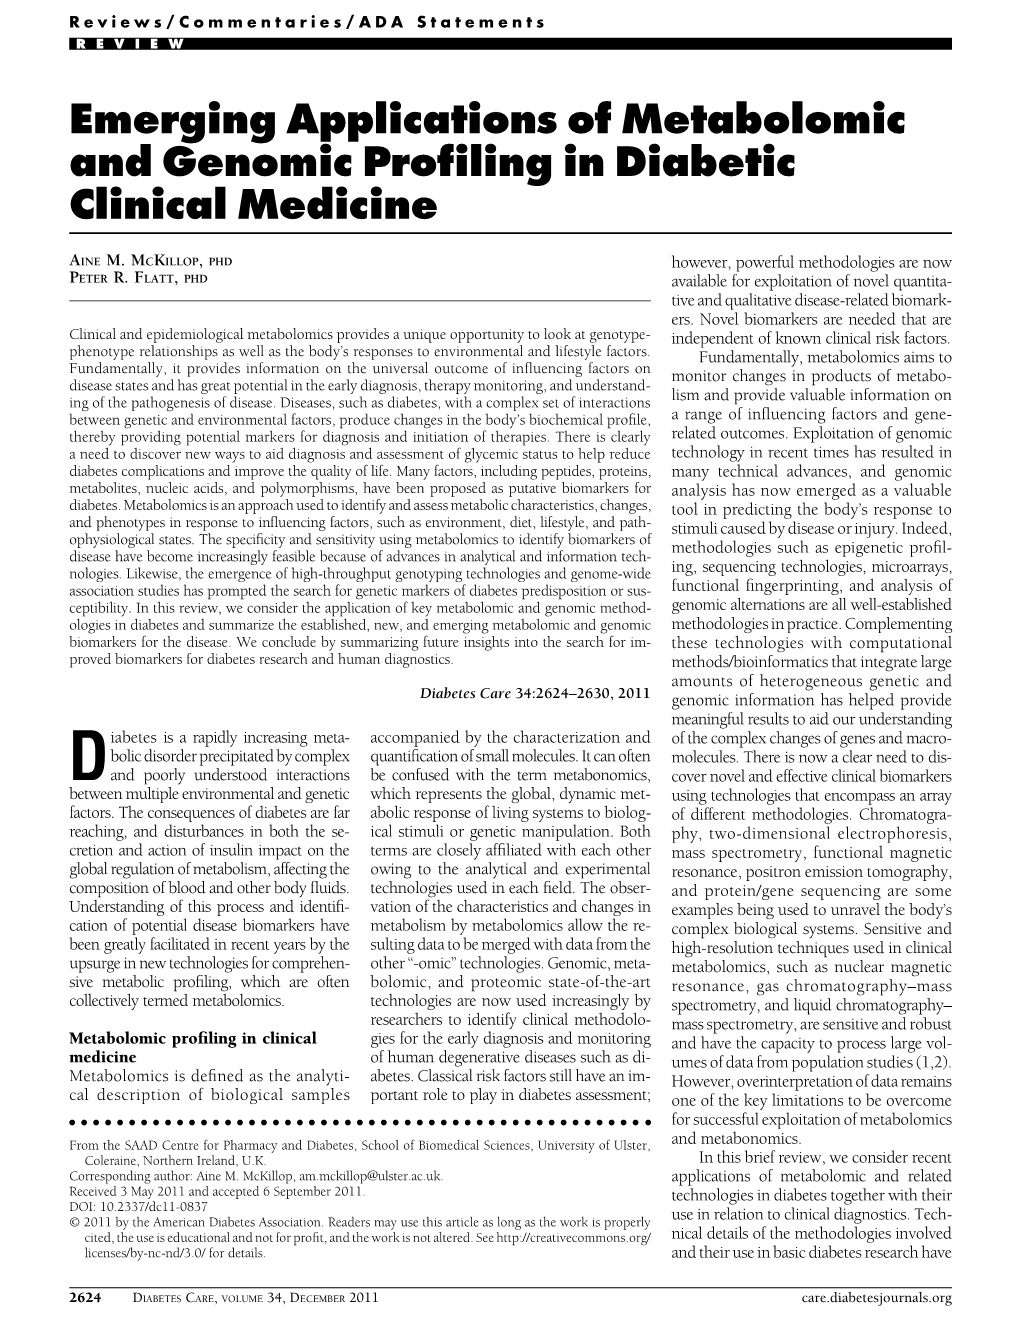 Emerging Applications of Metabolomic and Genomic Profiling in Diabetic Clinical Medicine